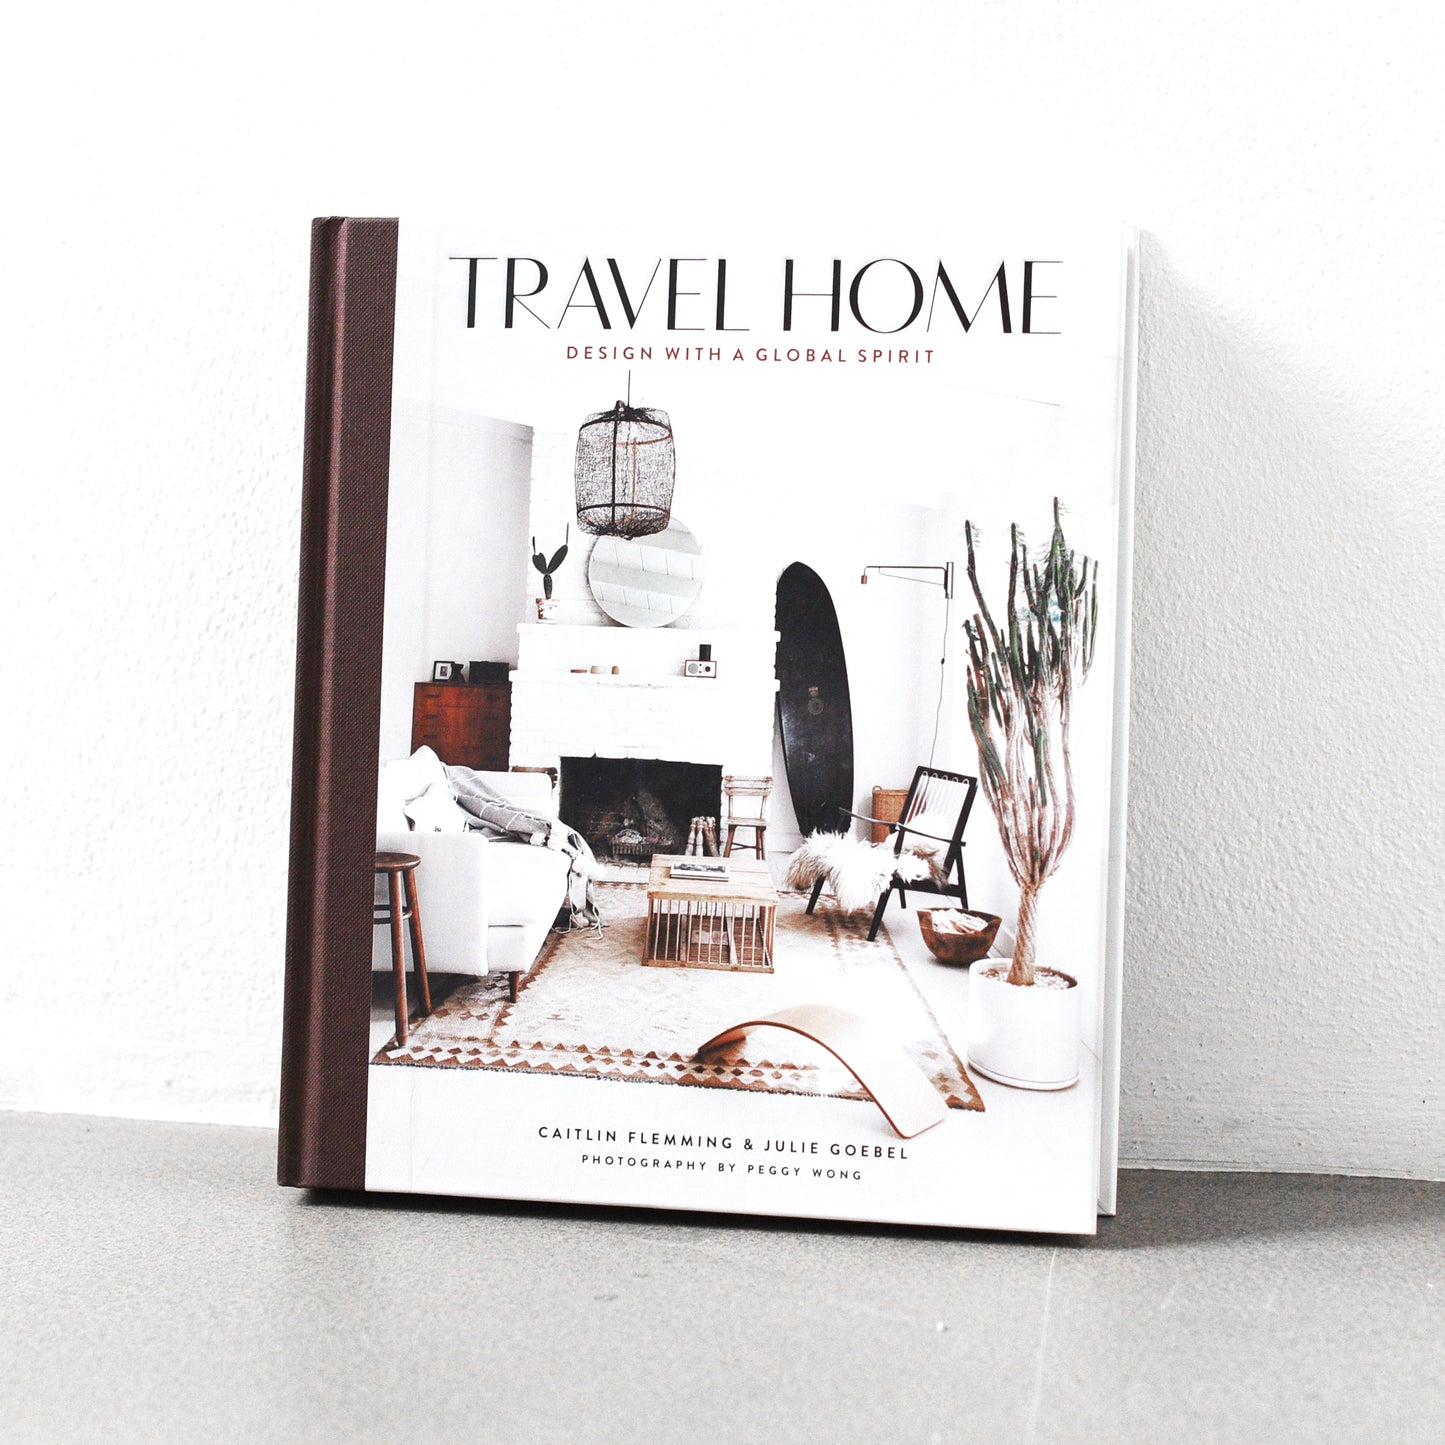 Travel Home: Design With a Global Spirit